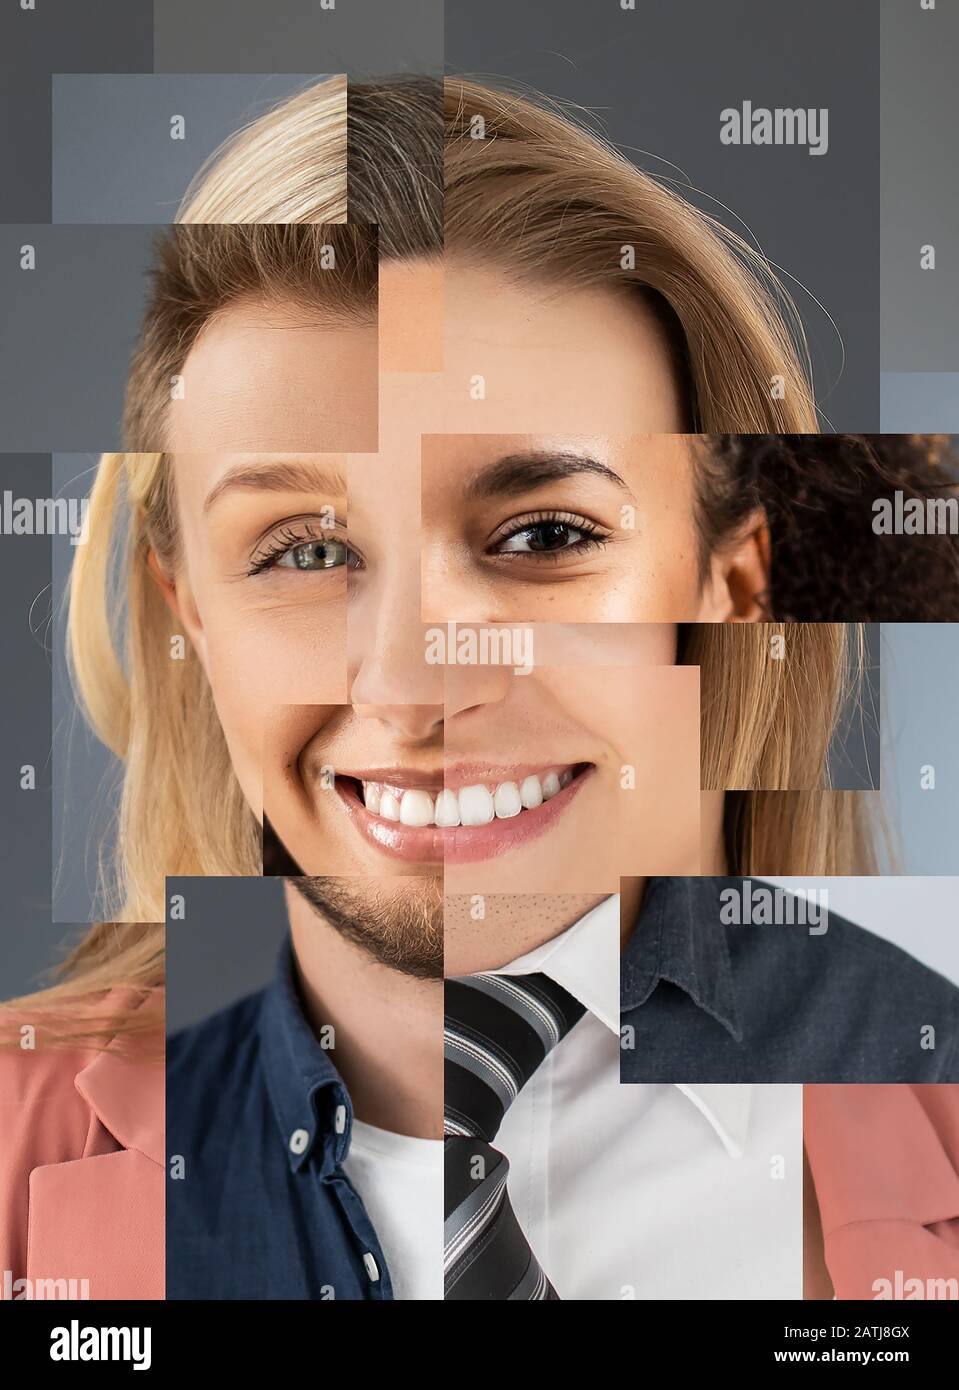 Collage of portraits of an ethnically diverse young business people. Stock Photo